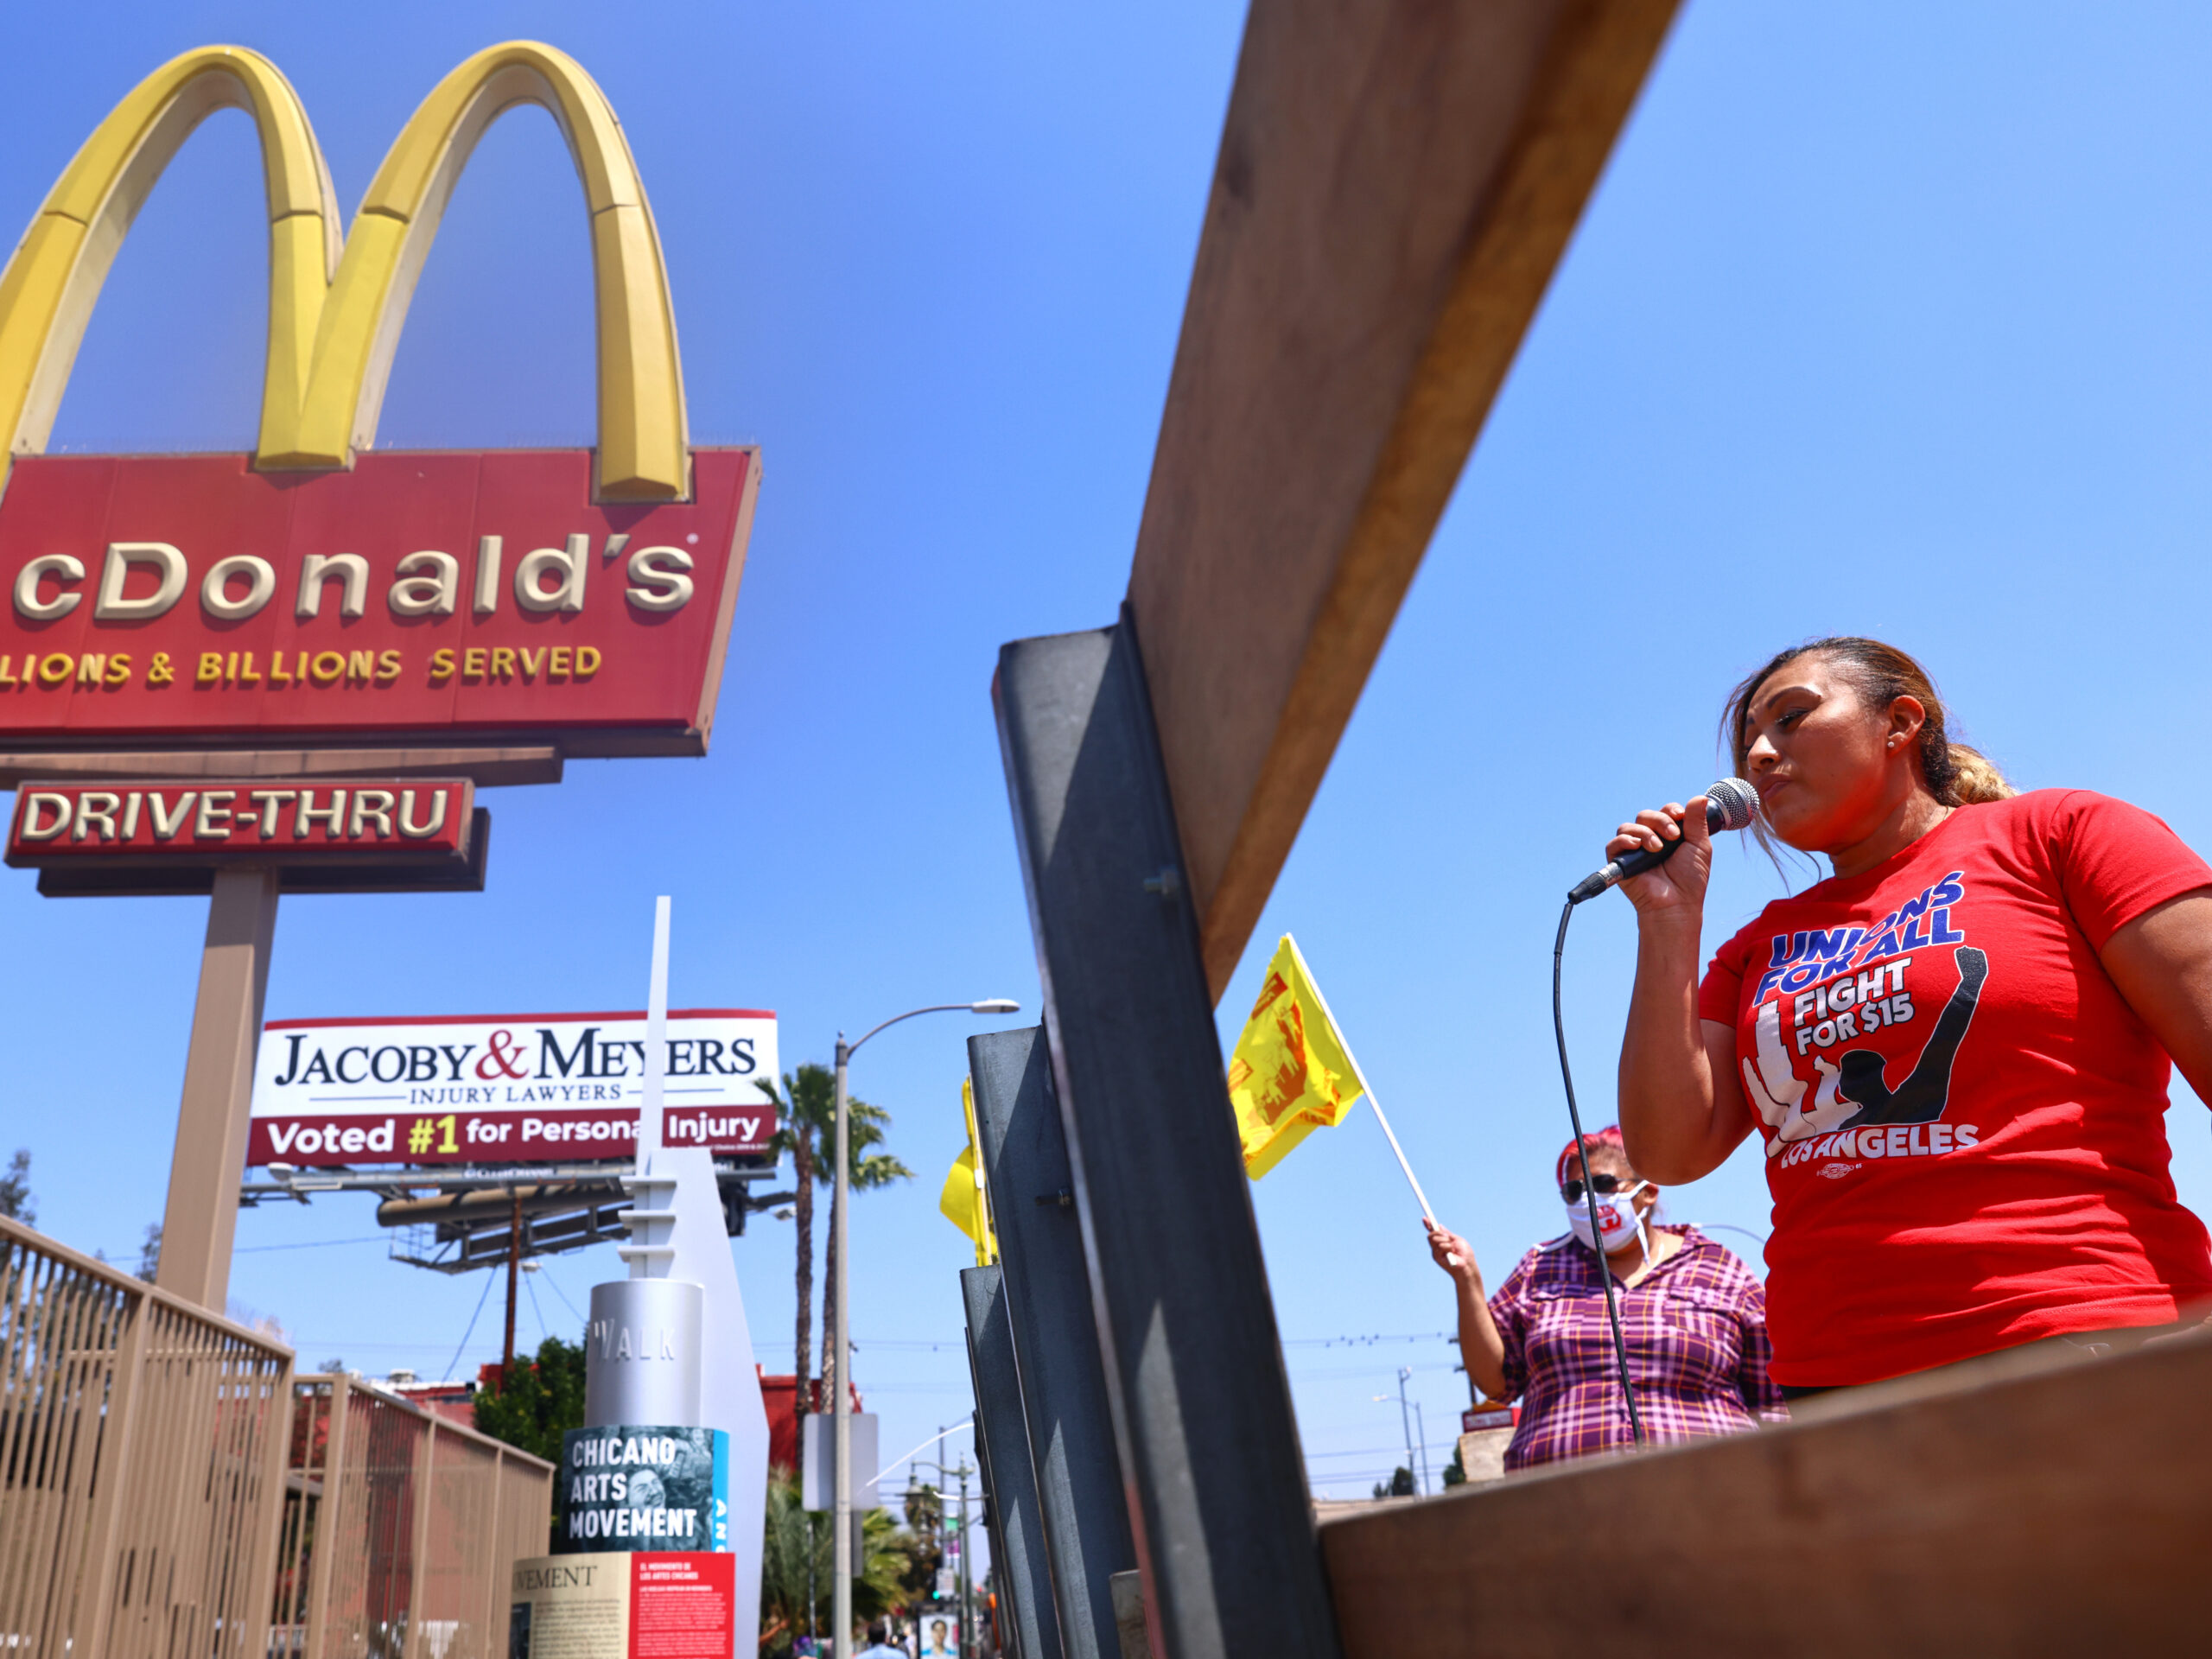 Fast-food workers rally for health and safety protections near a McDonald's in Los Angeles, in 2021.